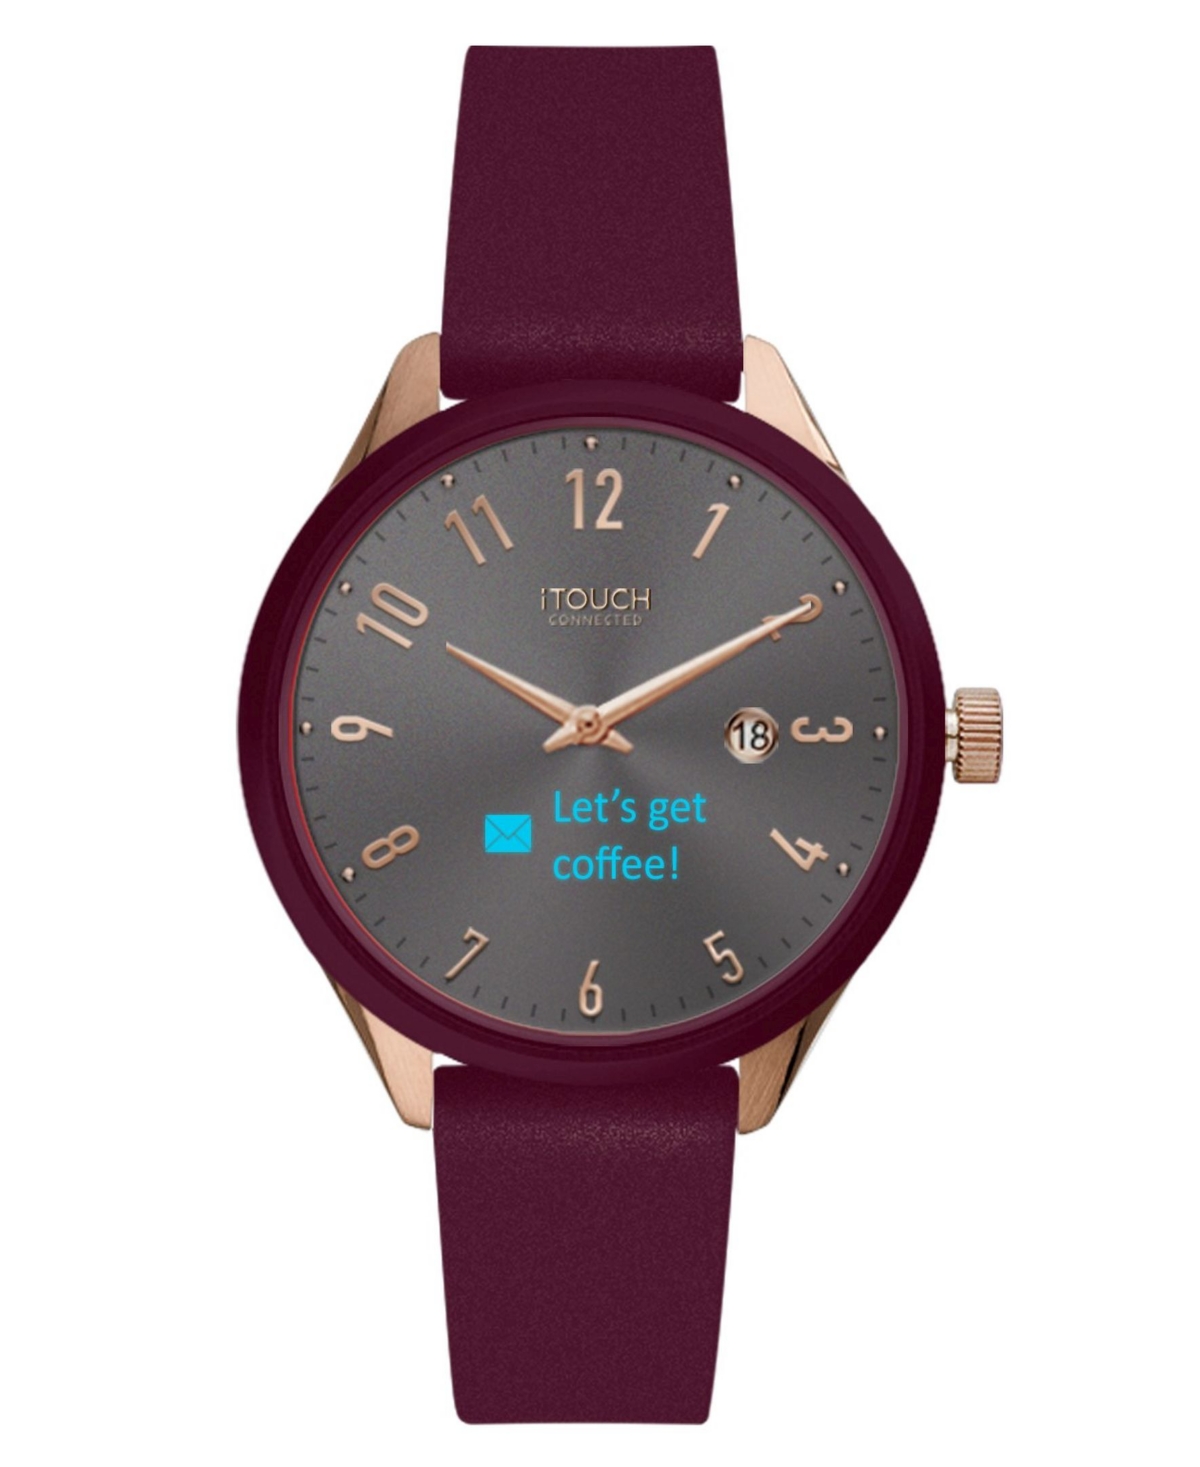 Connected Women's Hybrid Smartwatch Fitness Tracker: Rose Gold Case with Merlot Leather Strap 38mm - Merlot